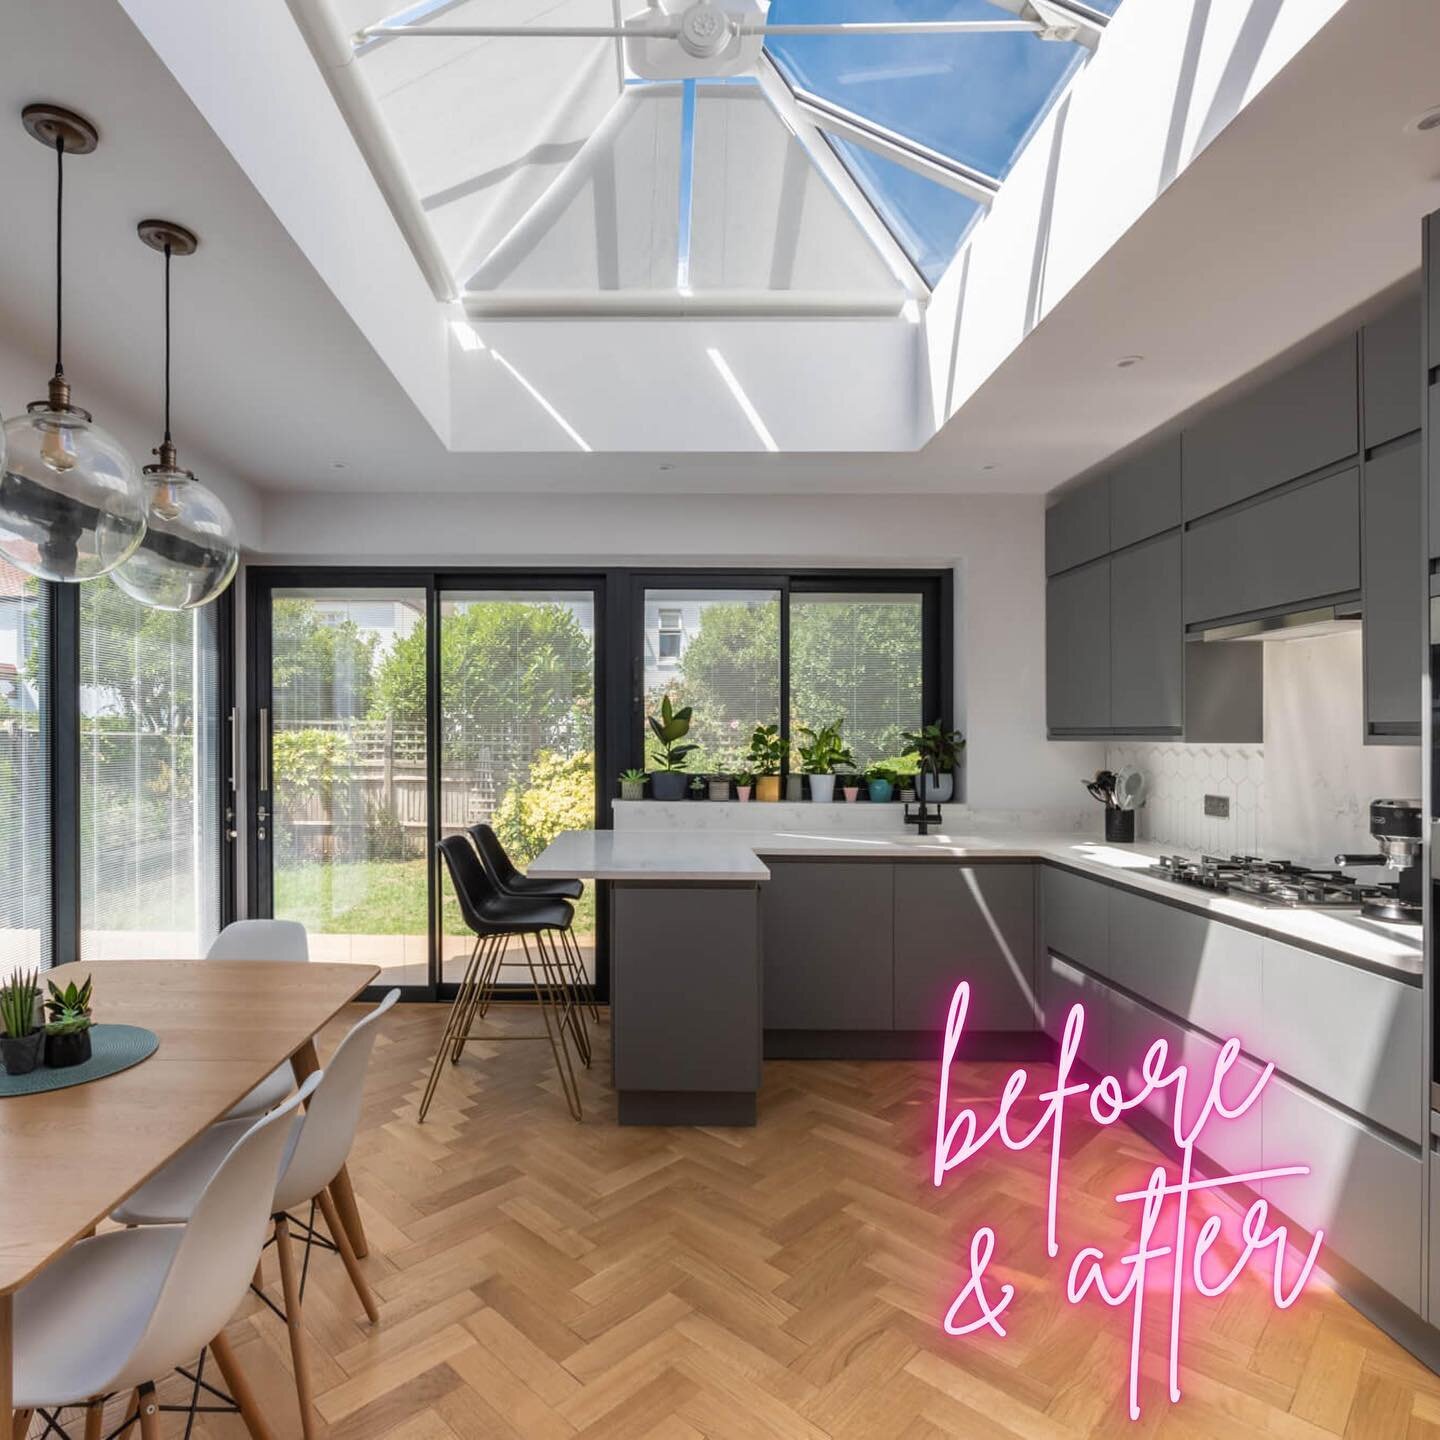 Before and After : An old, tired kitchen extension is given a new lease of life.

#circusstudio #circusstudiobrighton #kitchendesign #kitchendesignbrighton #kitchendesignerbrighton #dreamkitchen #stylidhkitchen #stylishkitchendesign #stylishkitchens 